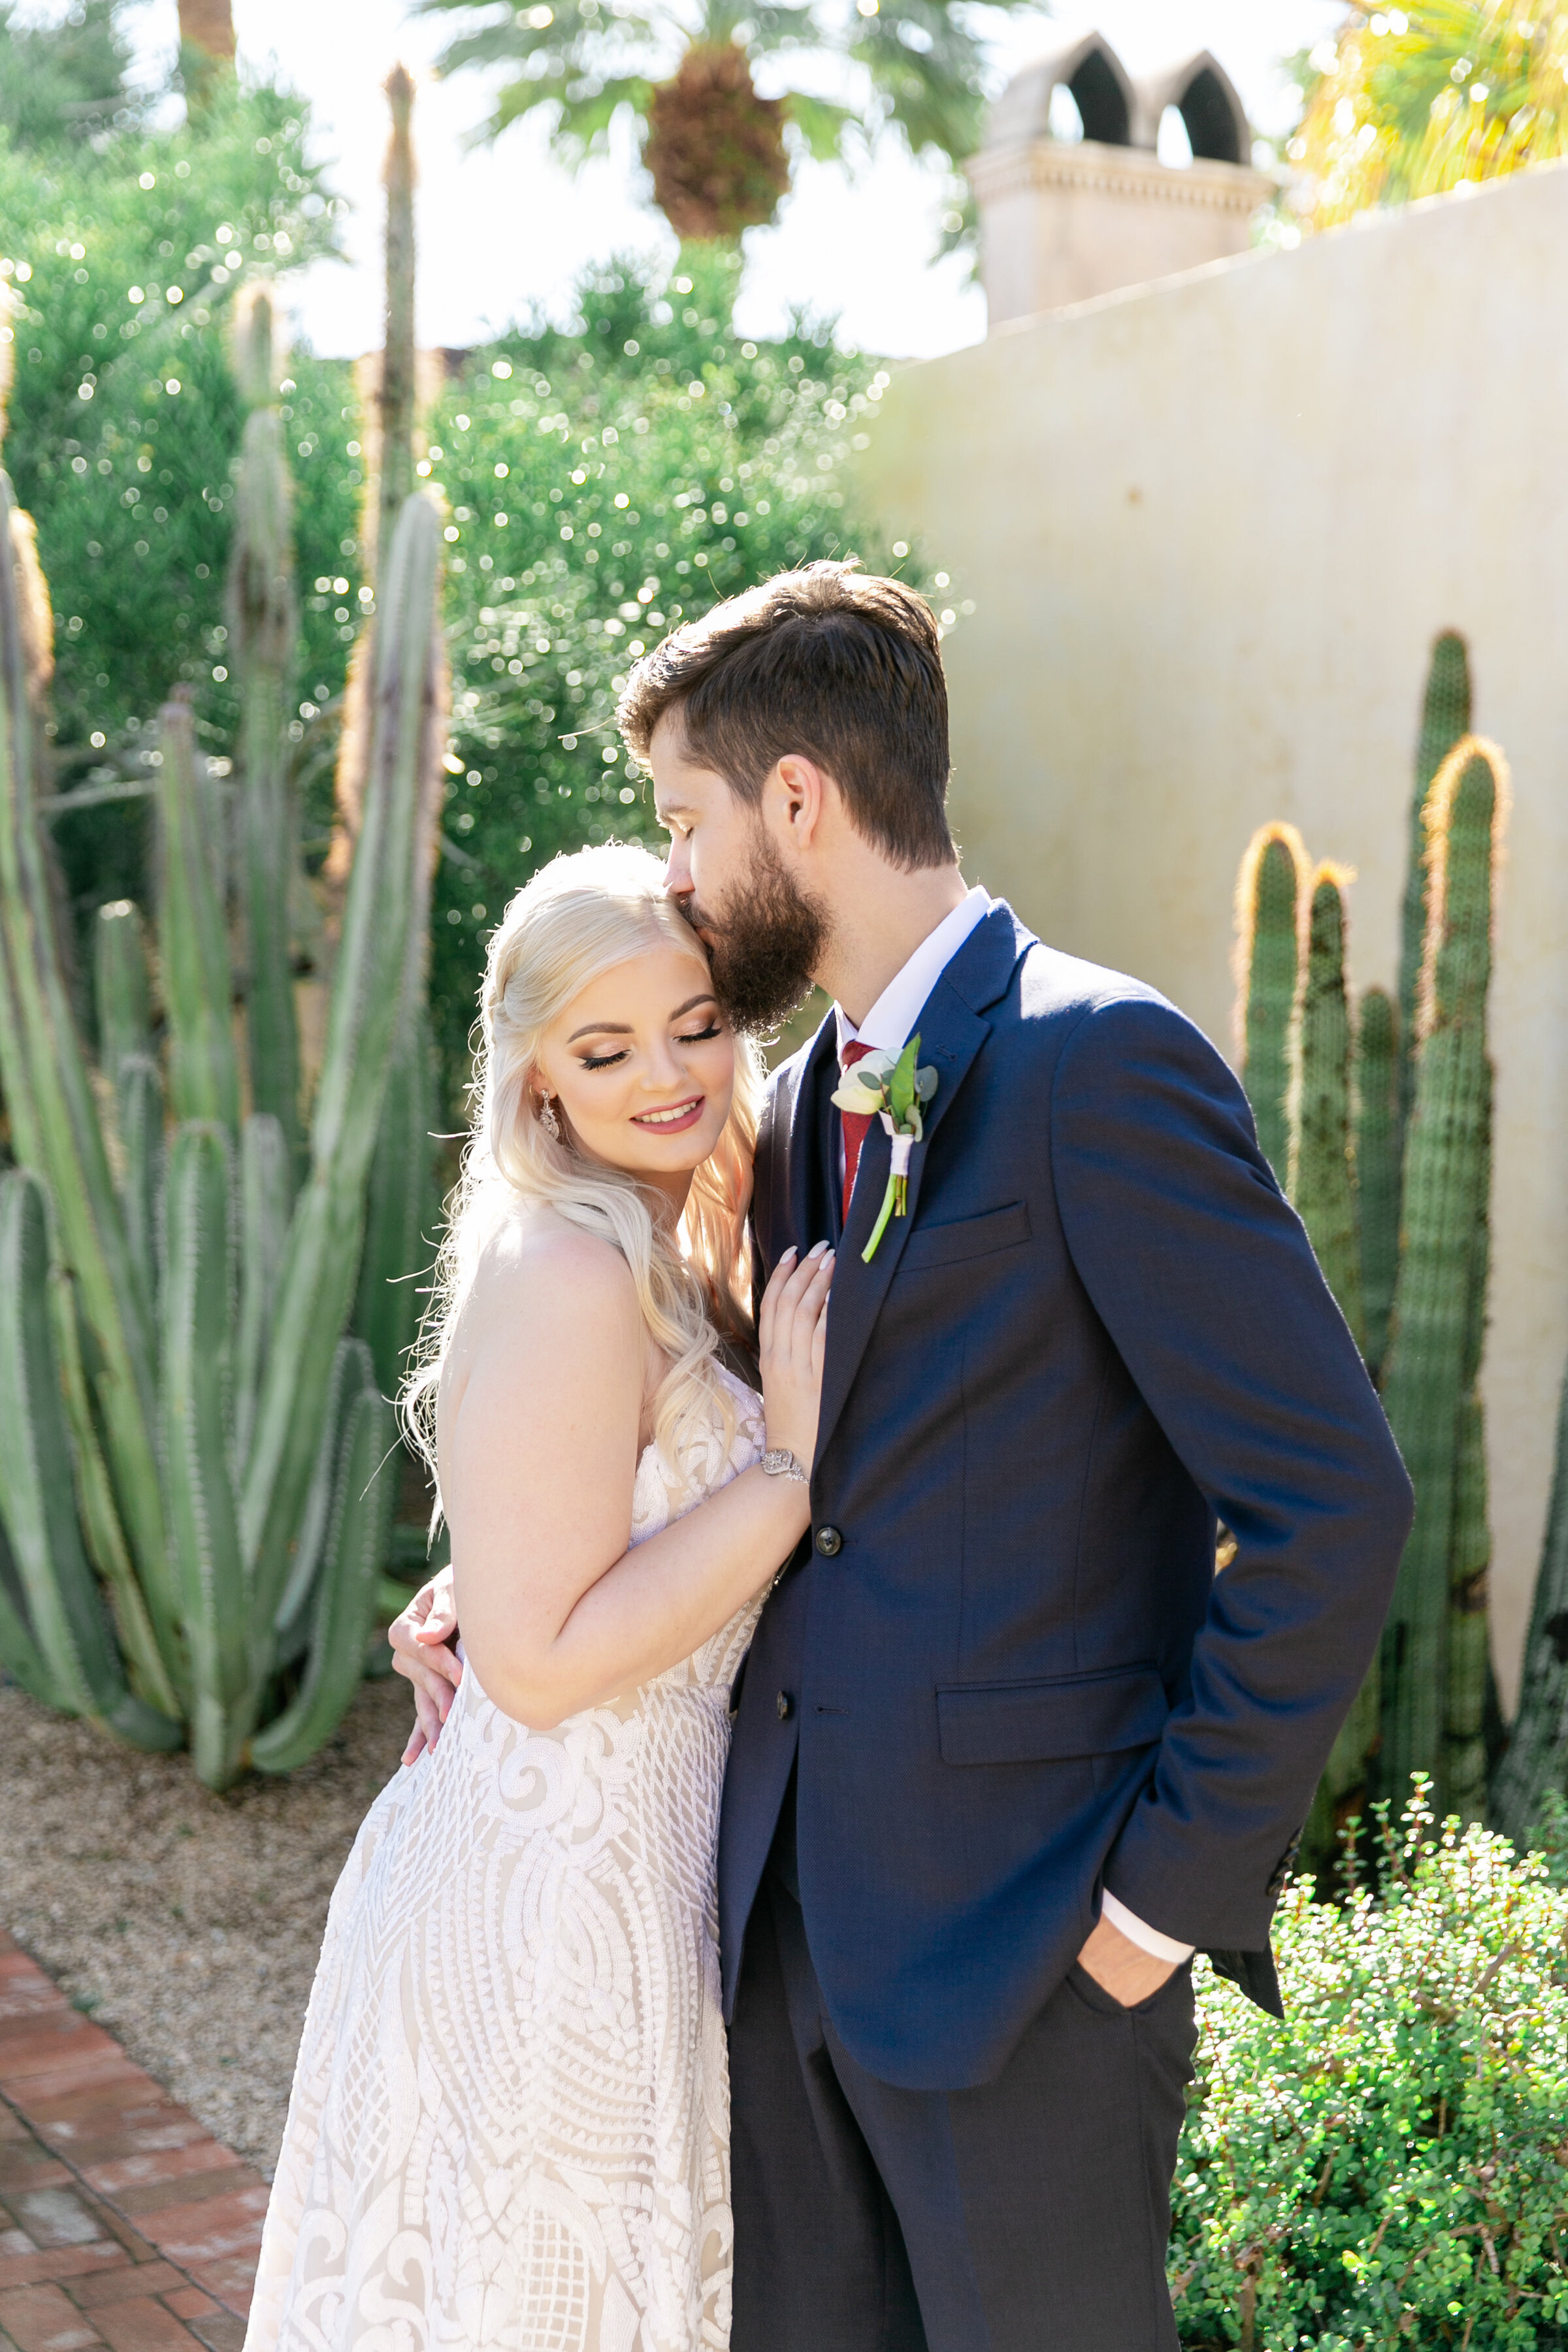 Karlie Colleen Photography - The Royal Palms Wedding - Some Like It Classic - Alex & Sam-154